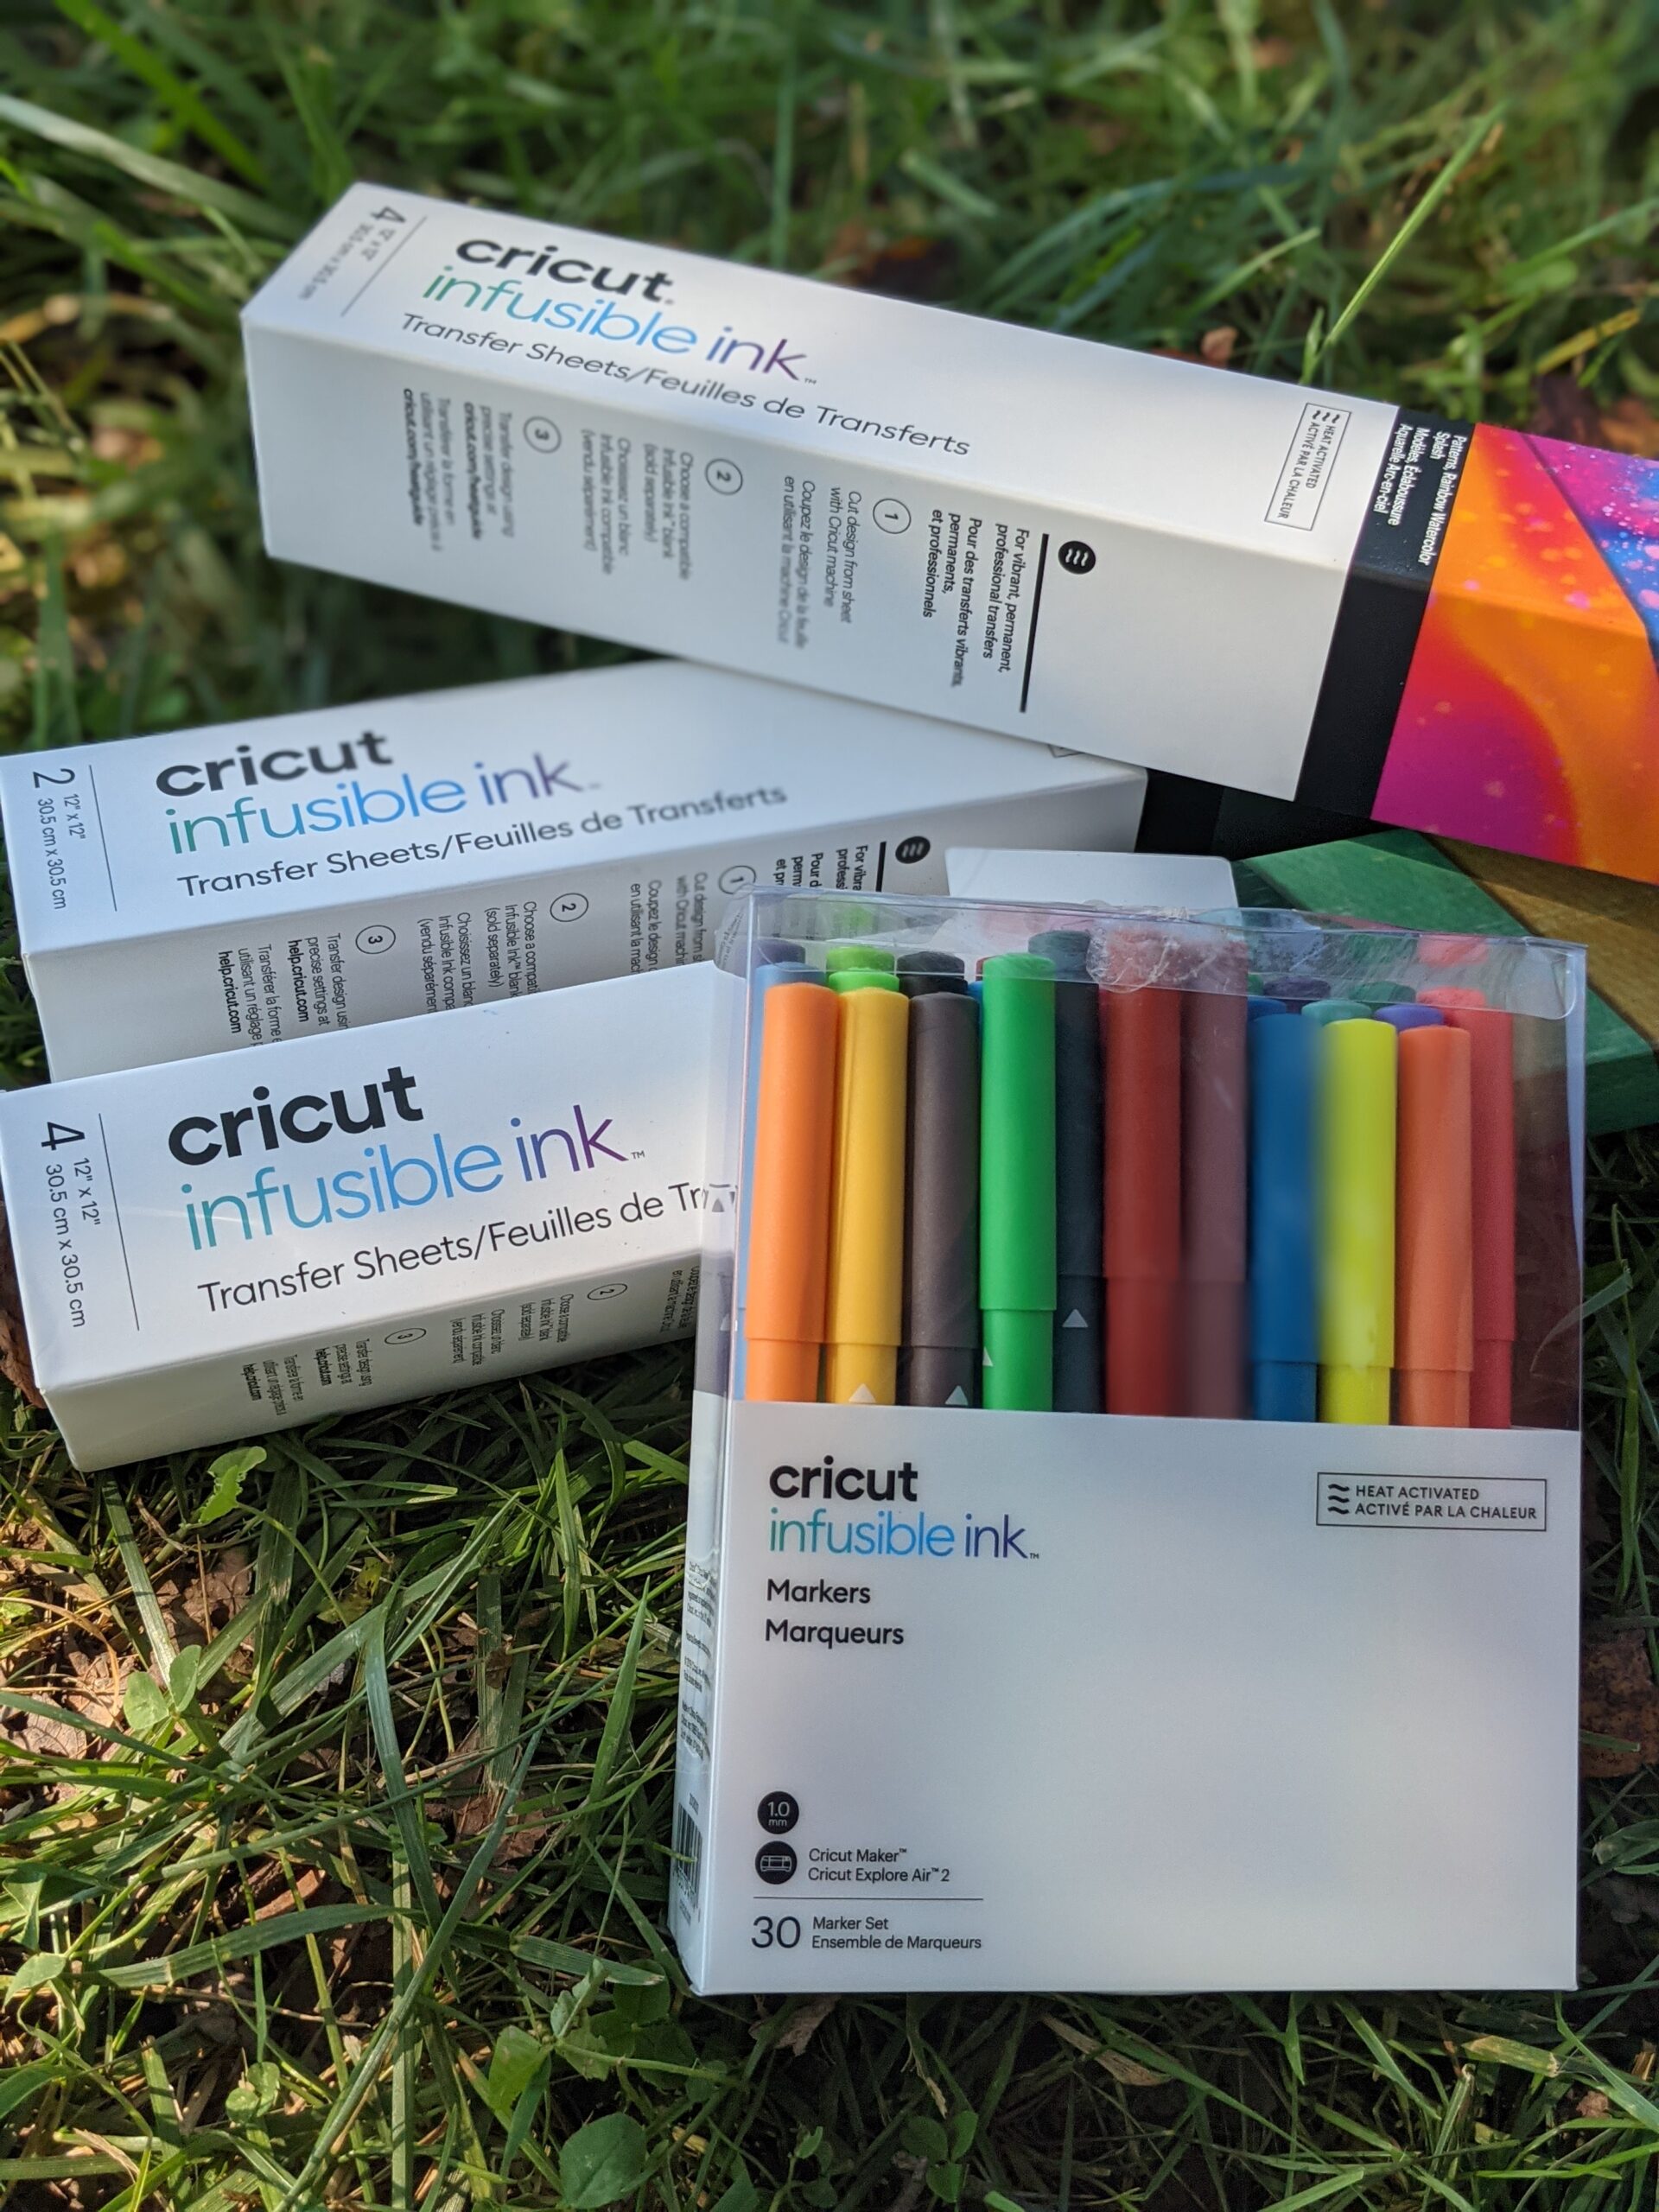 Cricut Infusible Ink 30 Markers, 1.0 mm